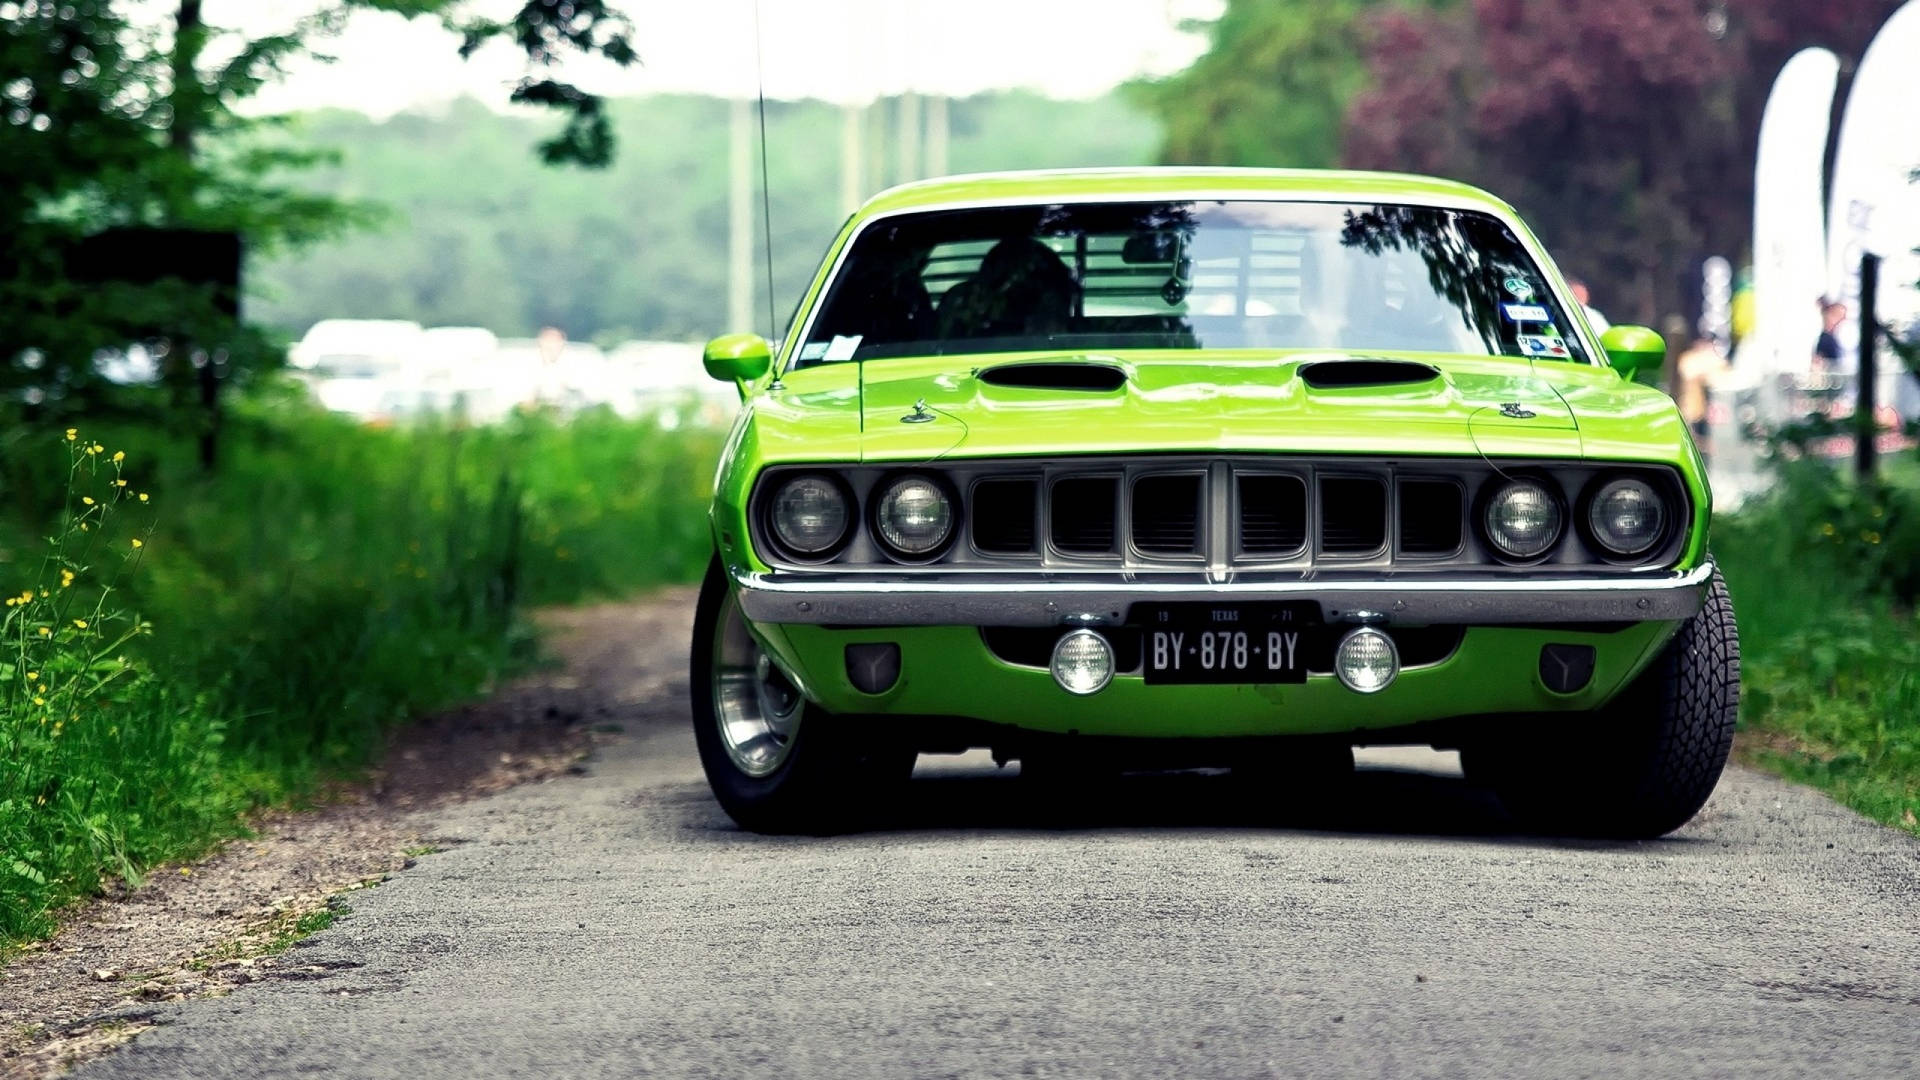 1971 Lime Green Plymouth Barracuda Front View Wallpaper